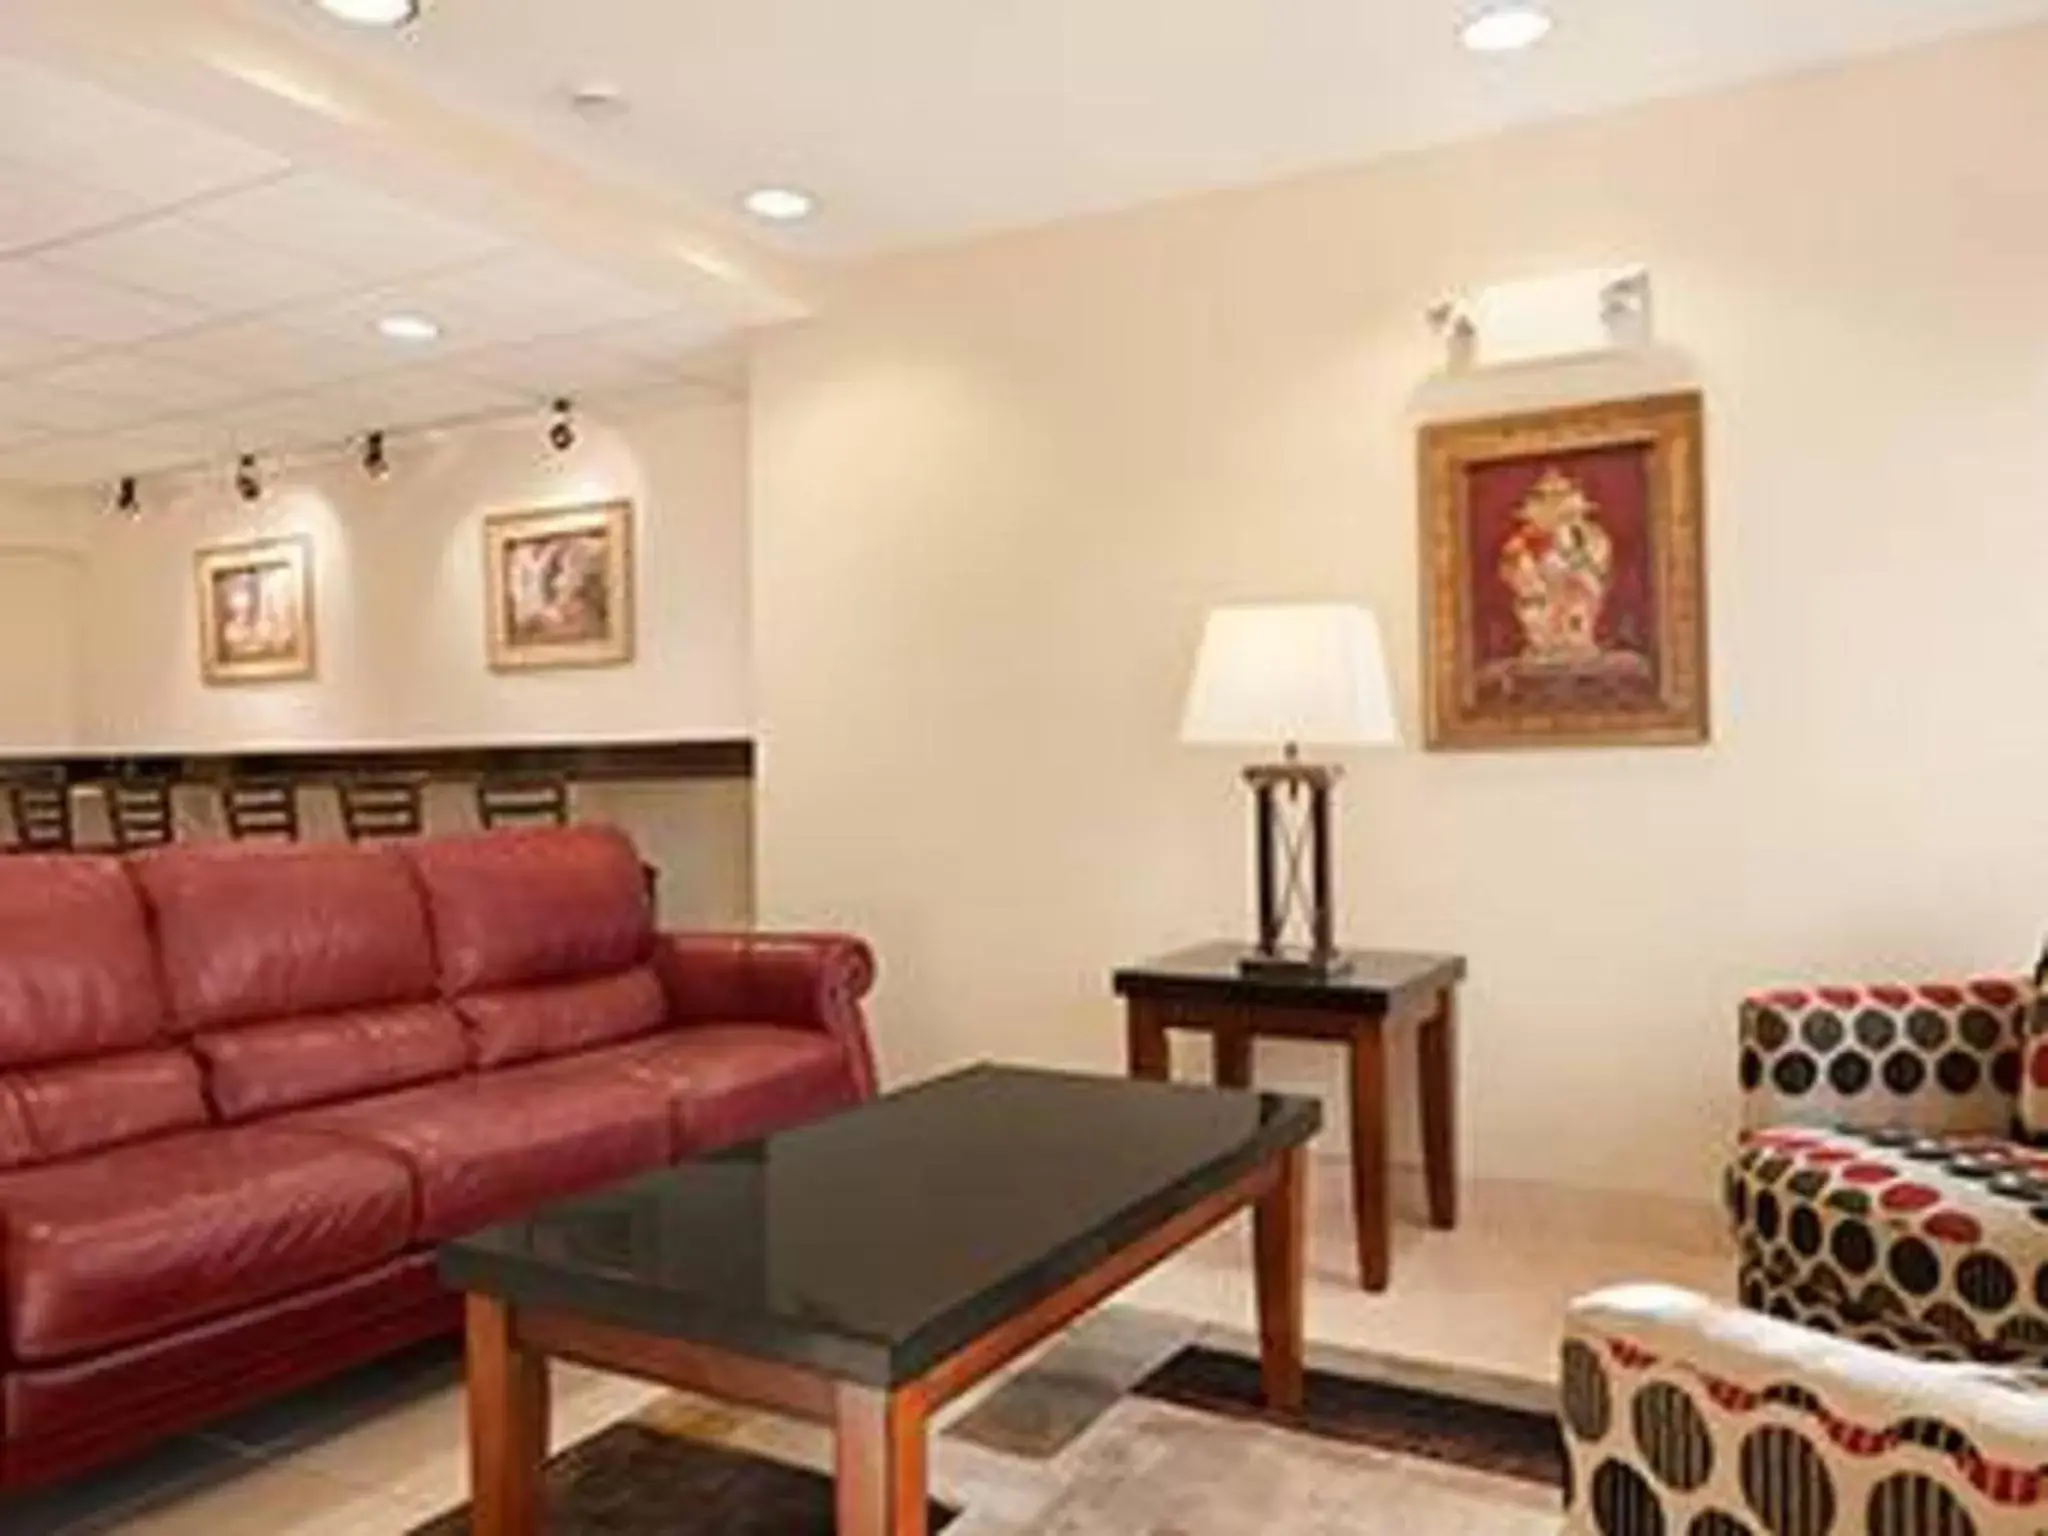 Lounge or bar, Seating Area in Microtel Inn & Suites by Wyndham Ann Arbor